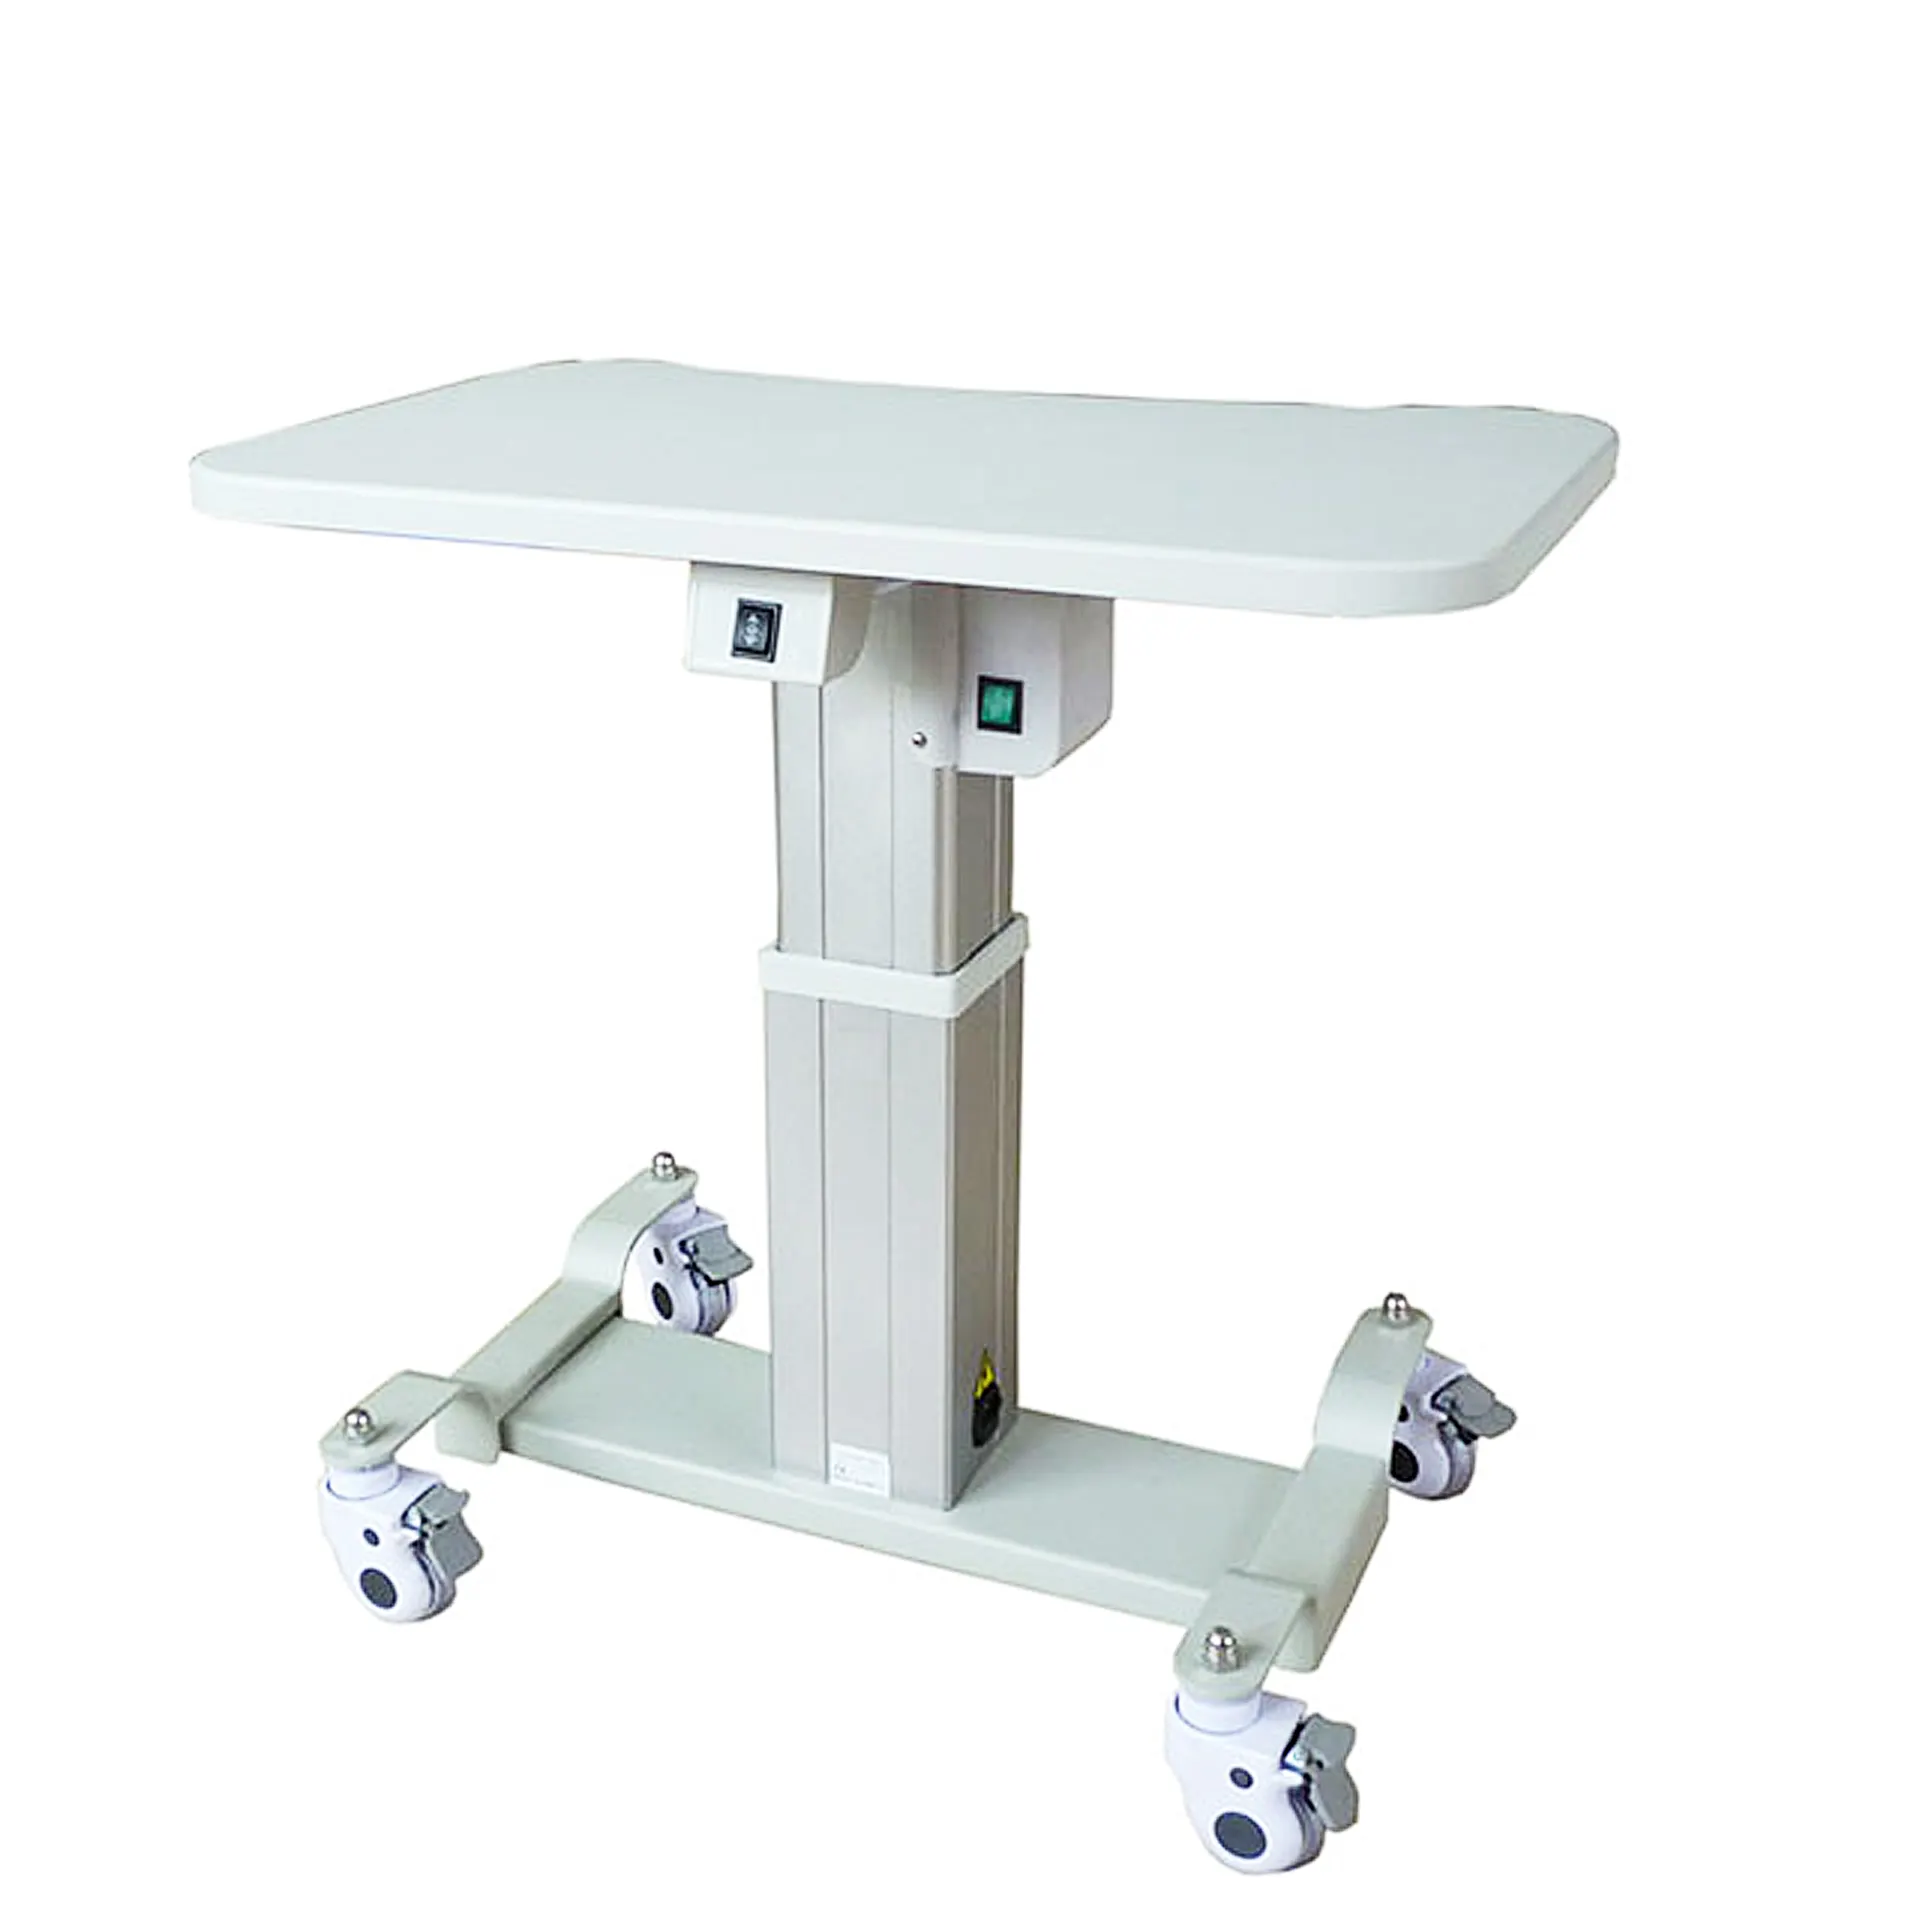 Professional Hospital Use Instrument Table TB-S180 75cm*48cm Adjustable Height with Motorized Adjustment Easy to Move